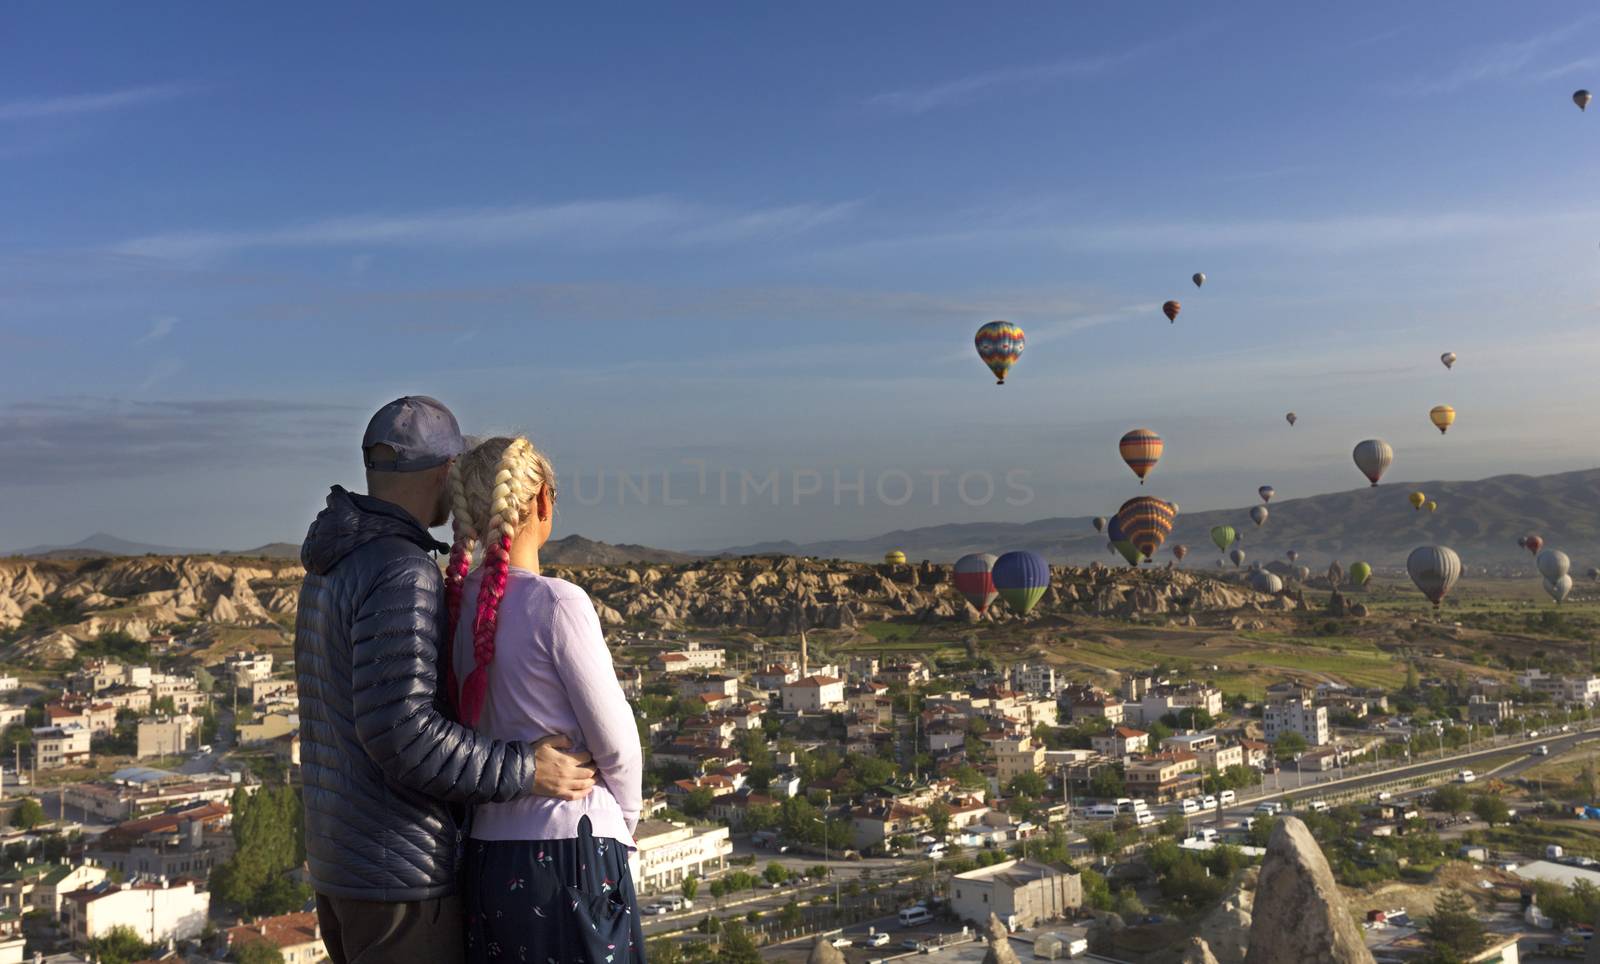 Young people watch dozens of balloons flying over the valleys of Cappadocia at dawn in central Turkey.